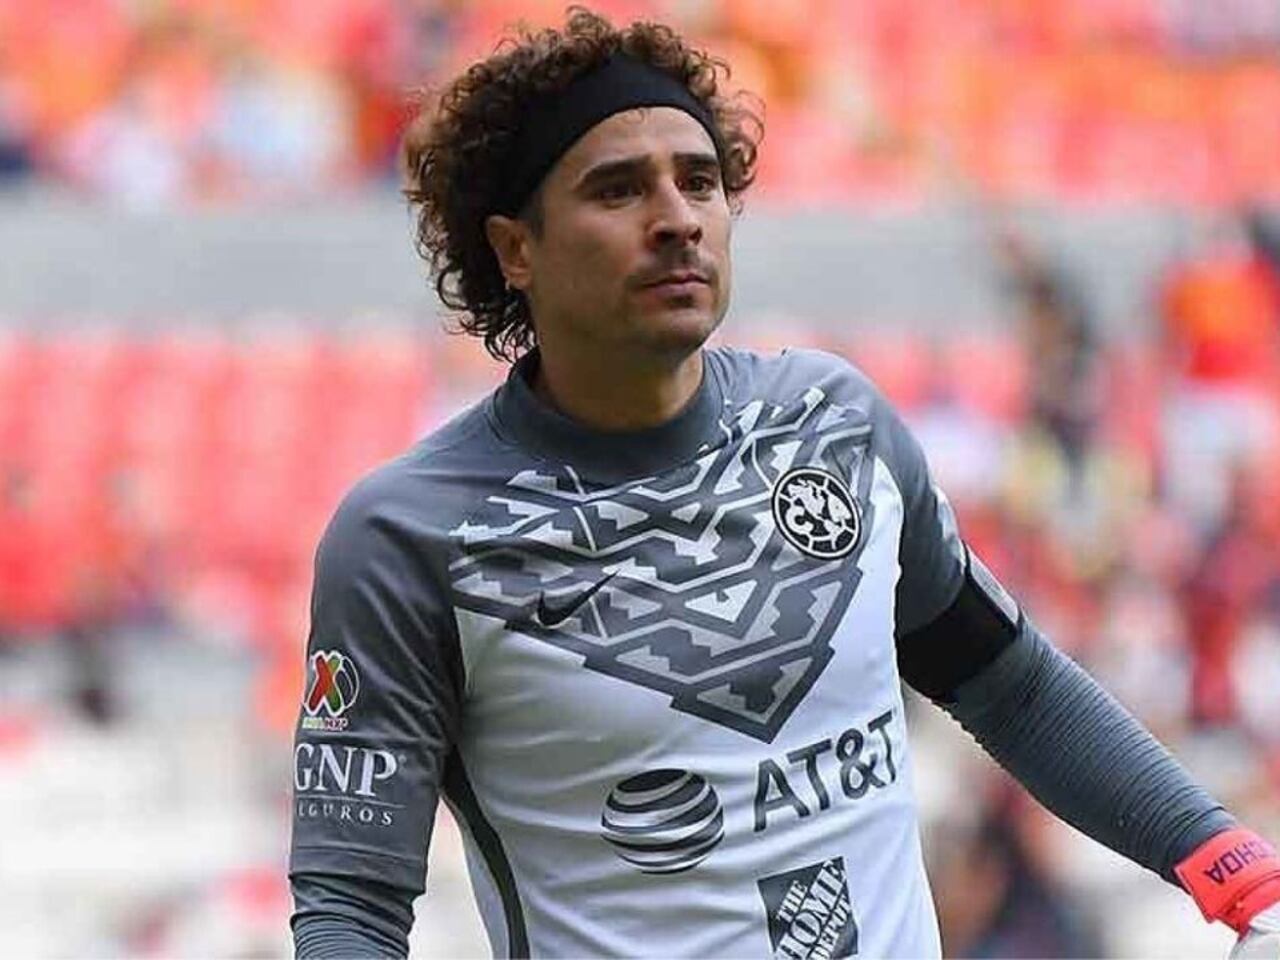 Mexico Soccer: Memo Ochoa will cause this player to leave Club América